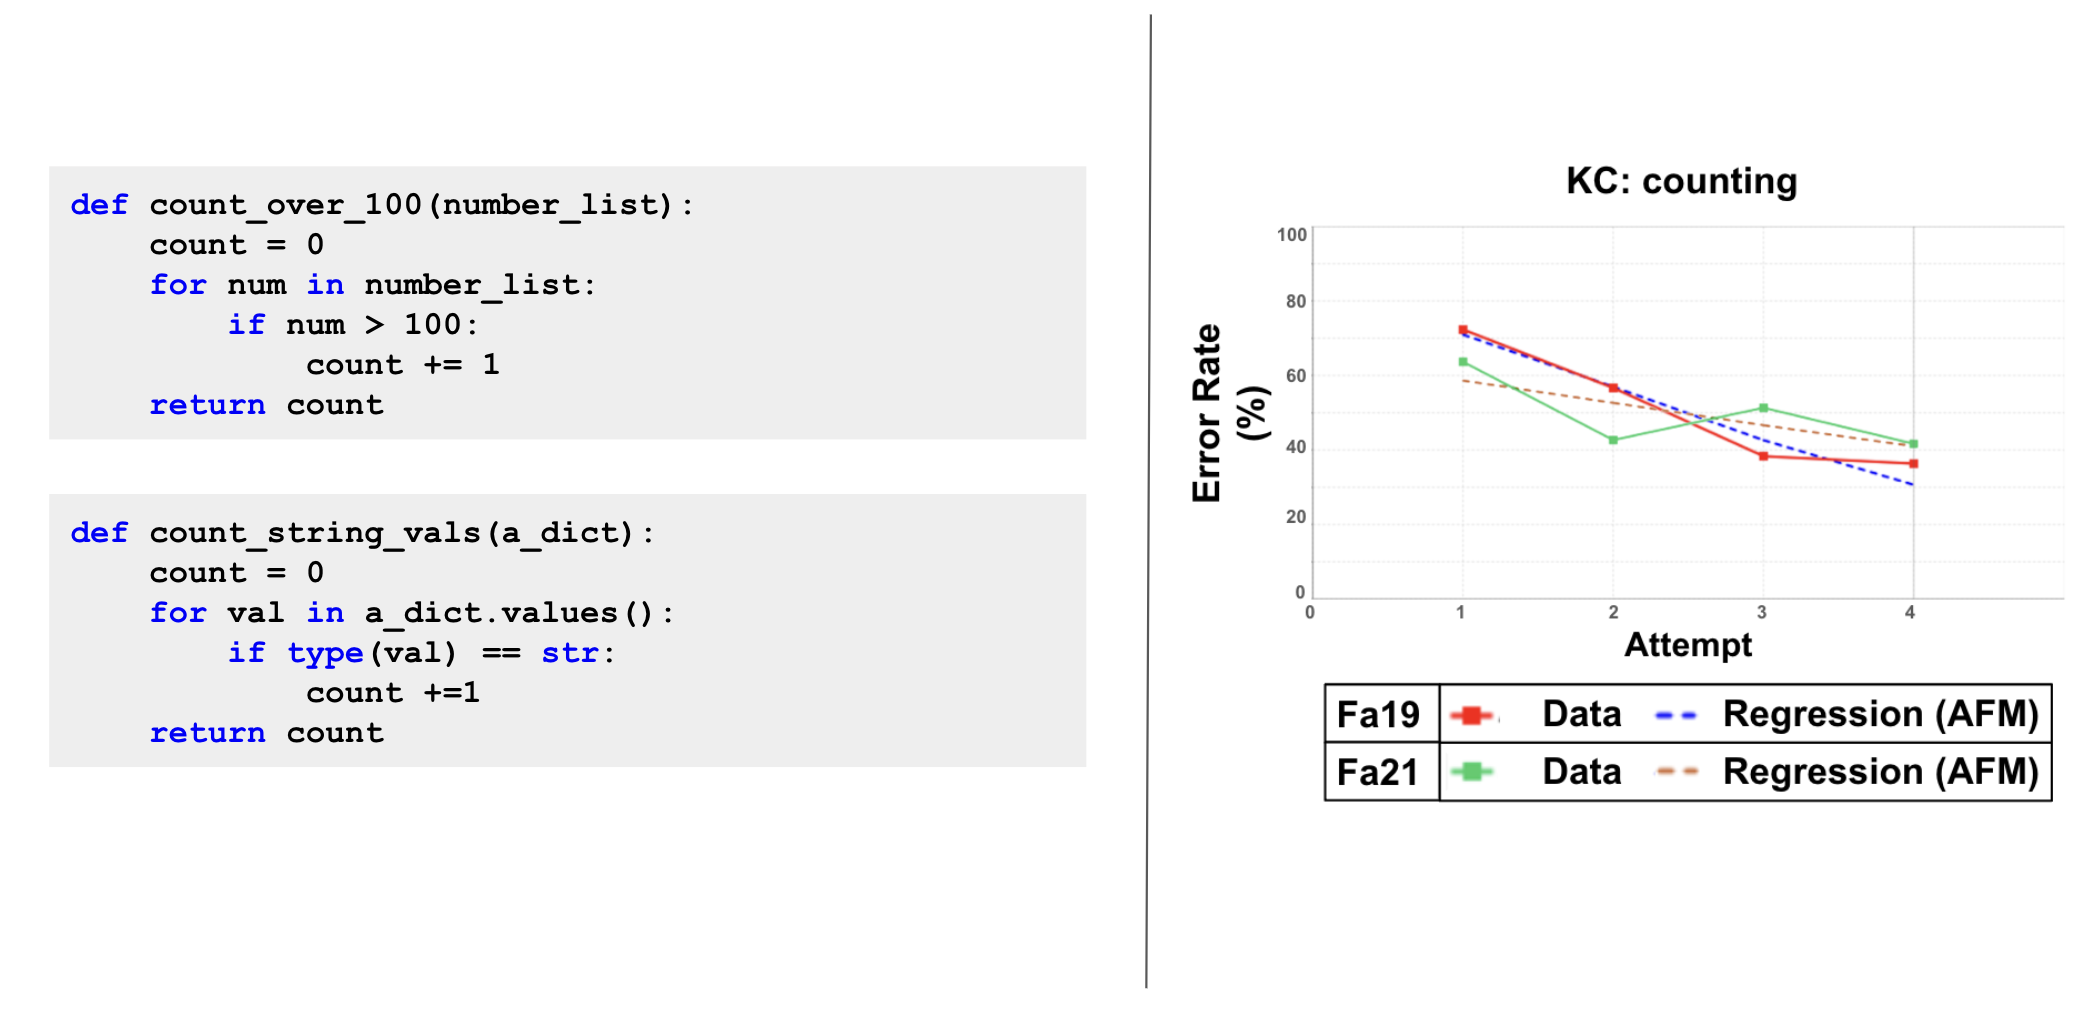 On the left, two gray text boxes, each including a short Python program that counts the elements in a collection that satisfy a given criteria. On the right, two learning curves: a red curve shows the Fall 2019 data and drops from 70% to below 40% in 4 attempts, a green curve shows the Fall 2021 data and shows a less sharp decline that goes from 65% to 40% over 4 attempts.